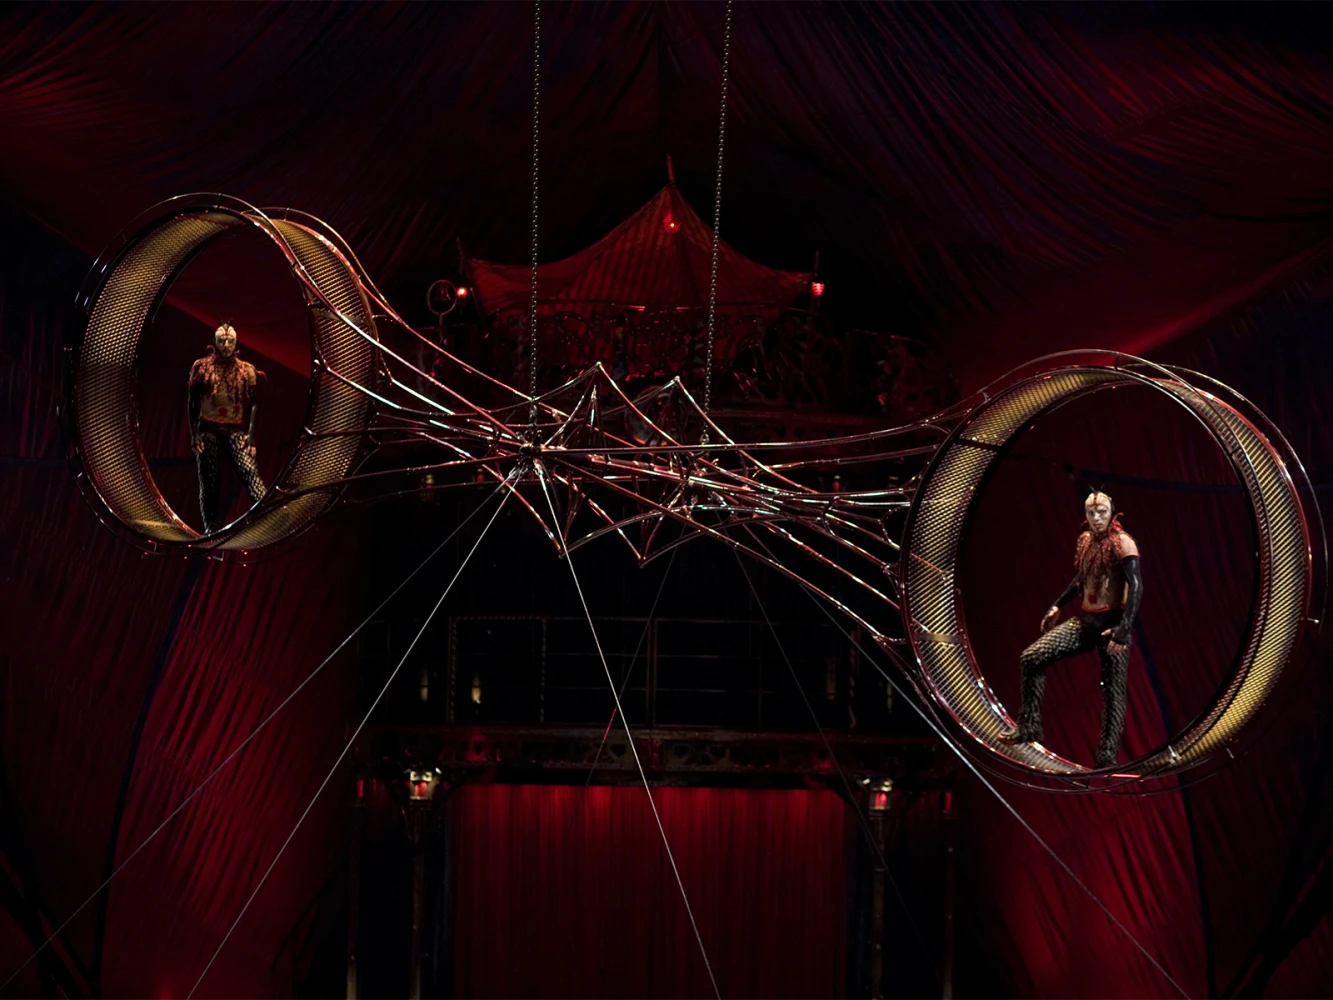 Cirque du Soleil: KOOZA: What to expect - 1